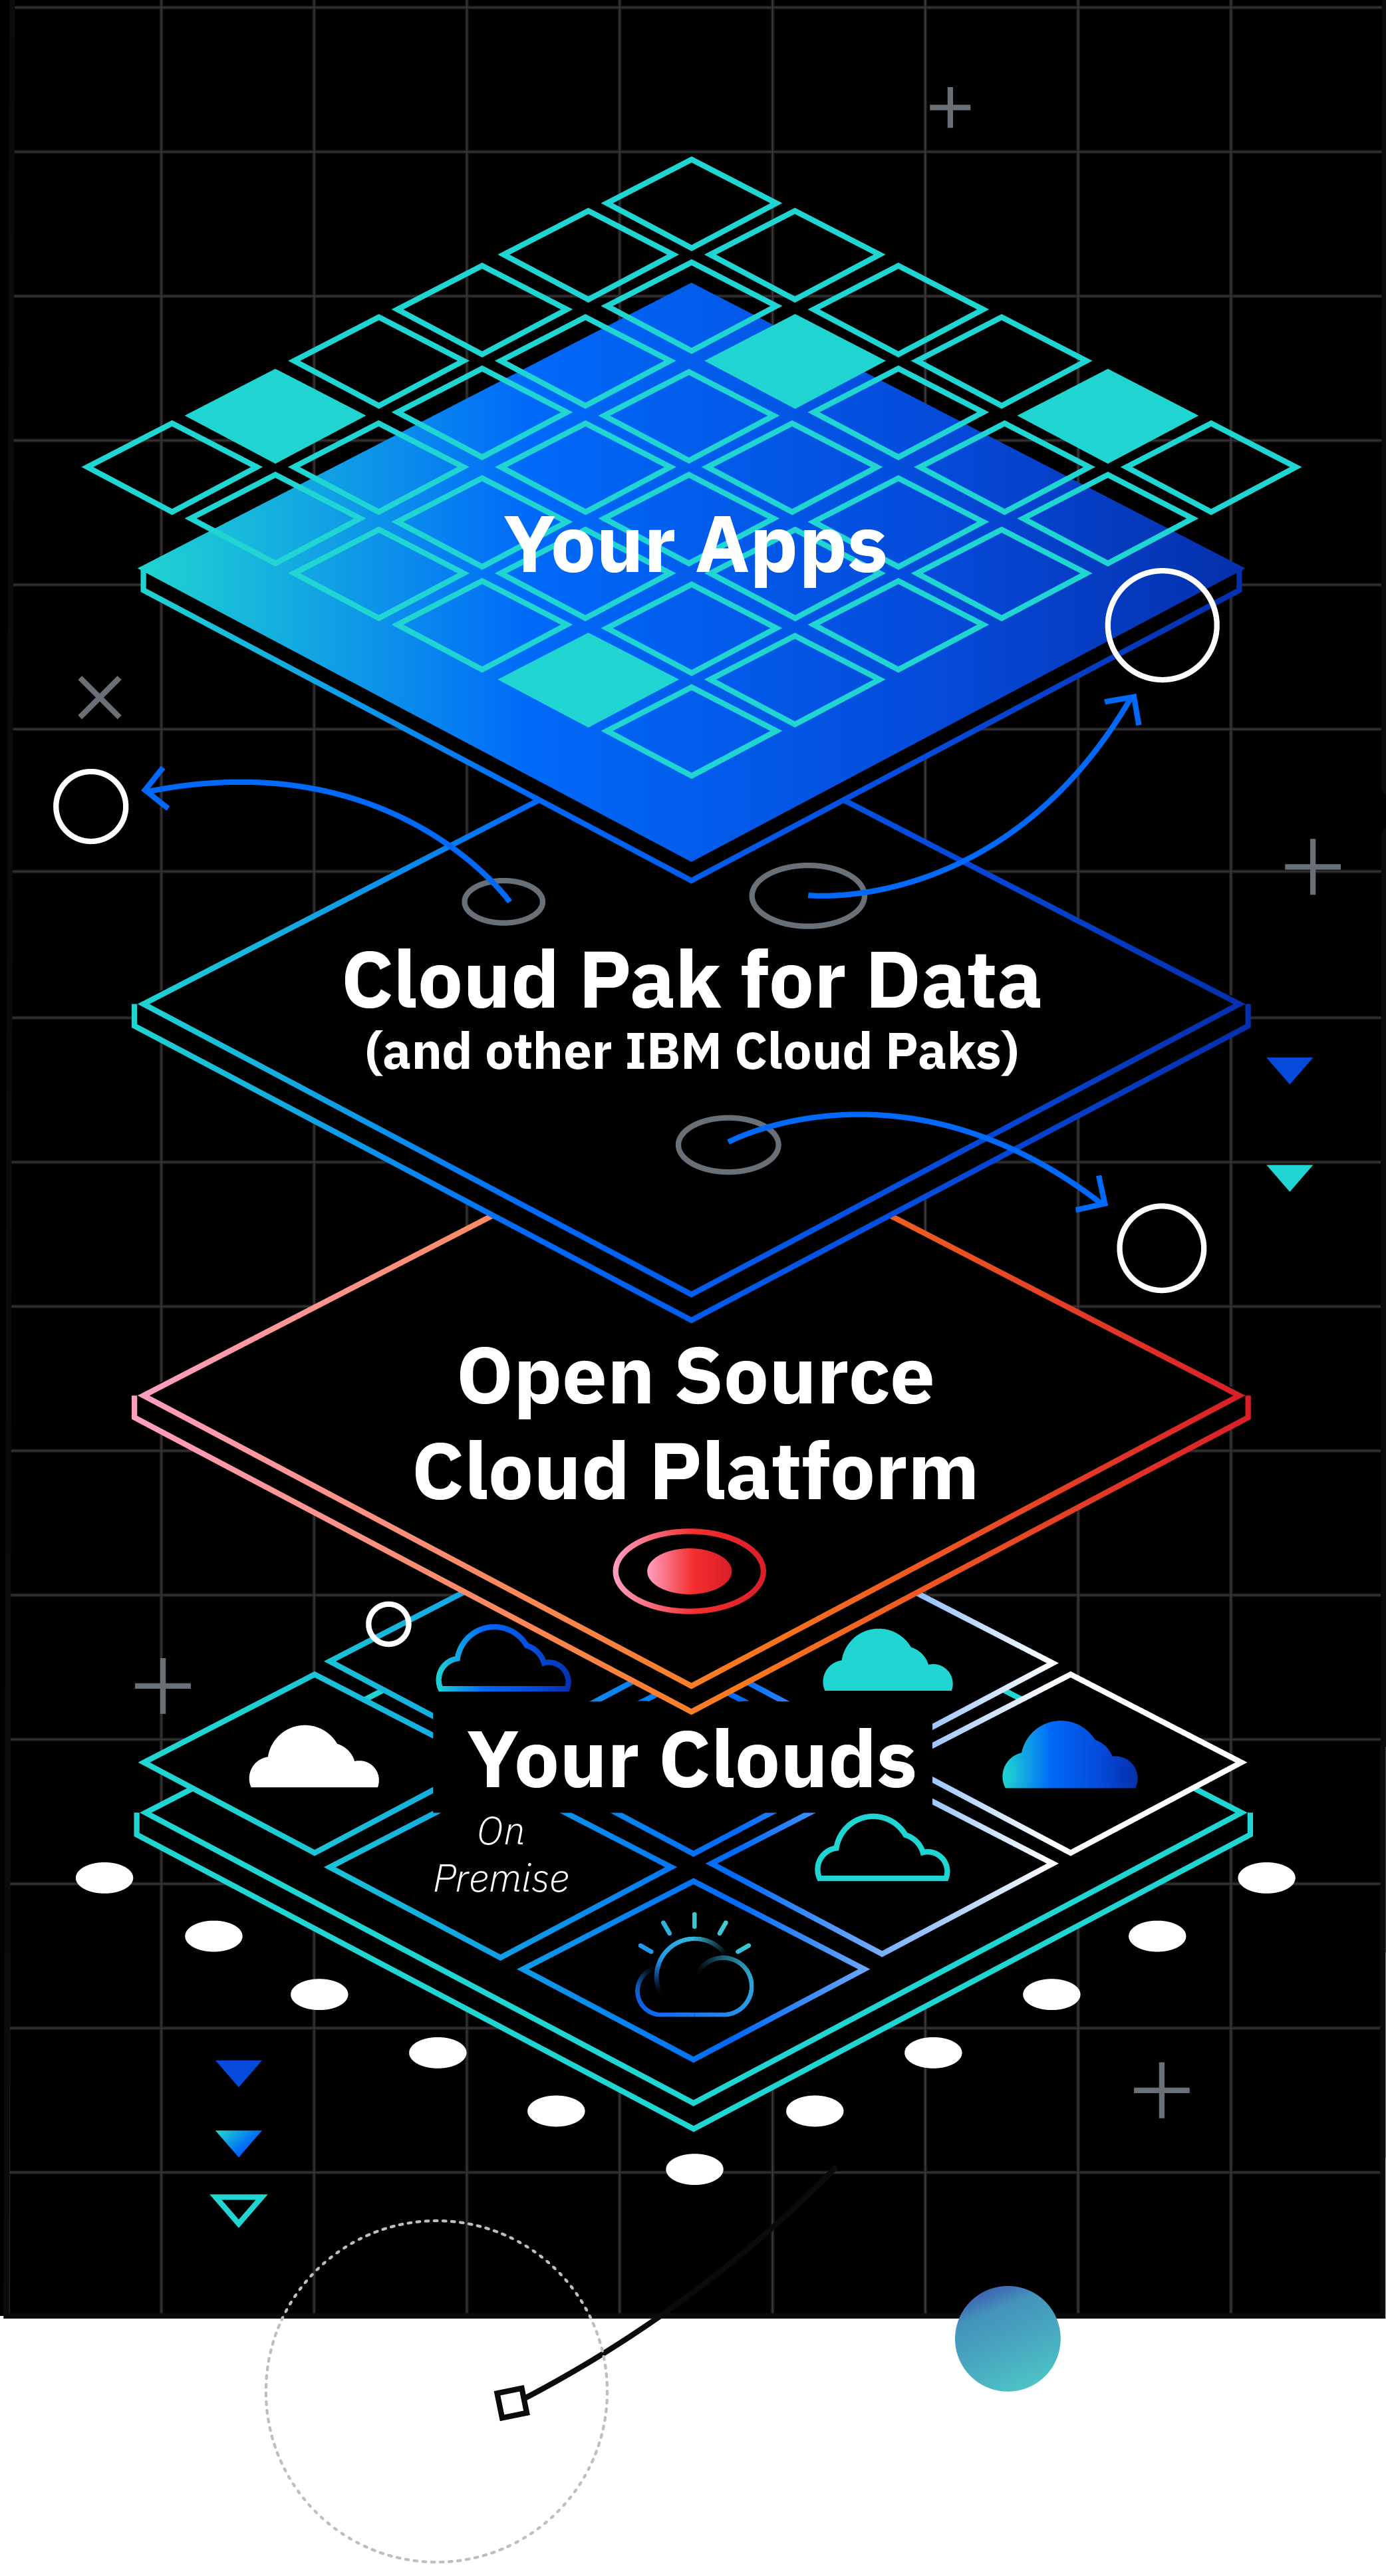 software stack showing relationship between client apps, IBM Cloud Paks, open source cloud platform and client clouds